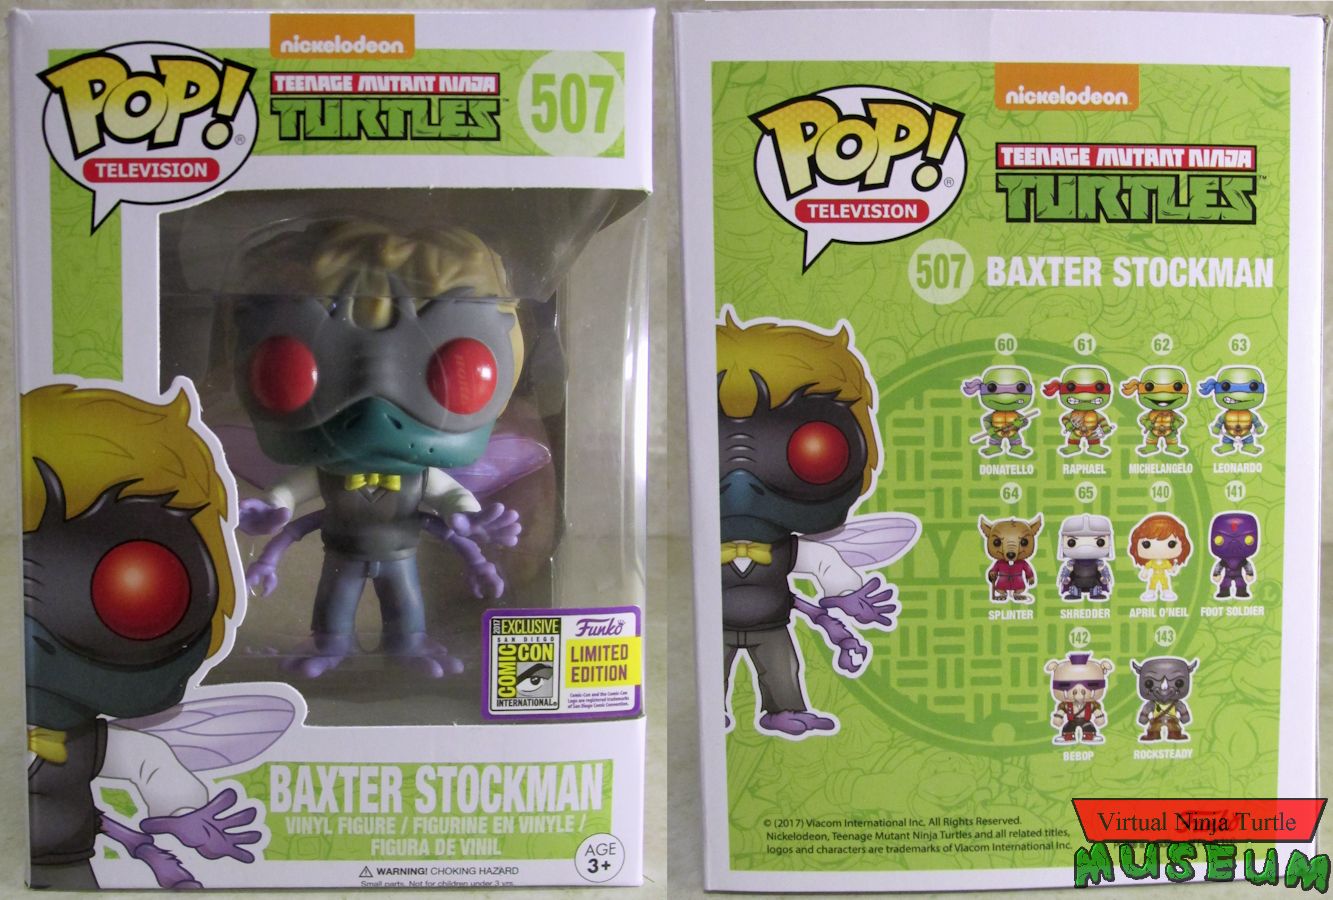 SDCC sticker box front and back